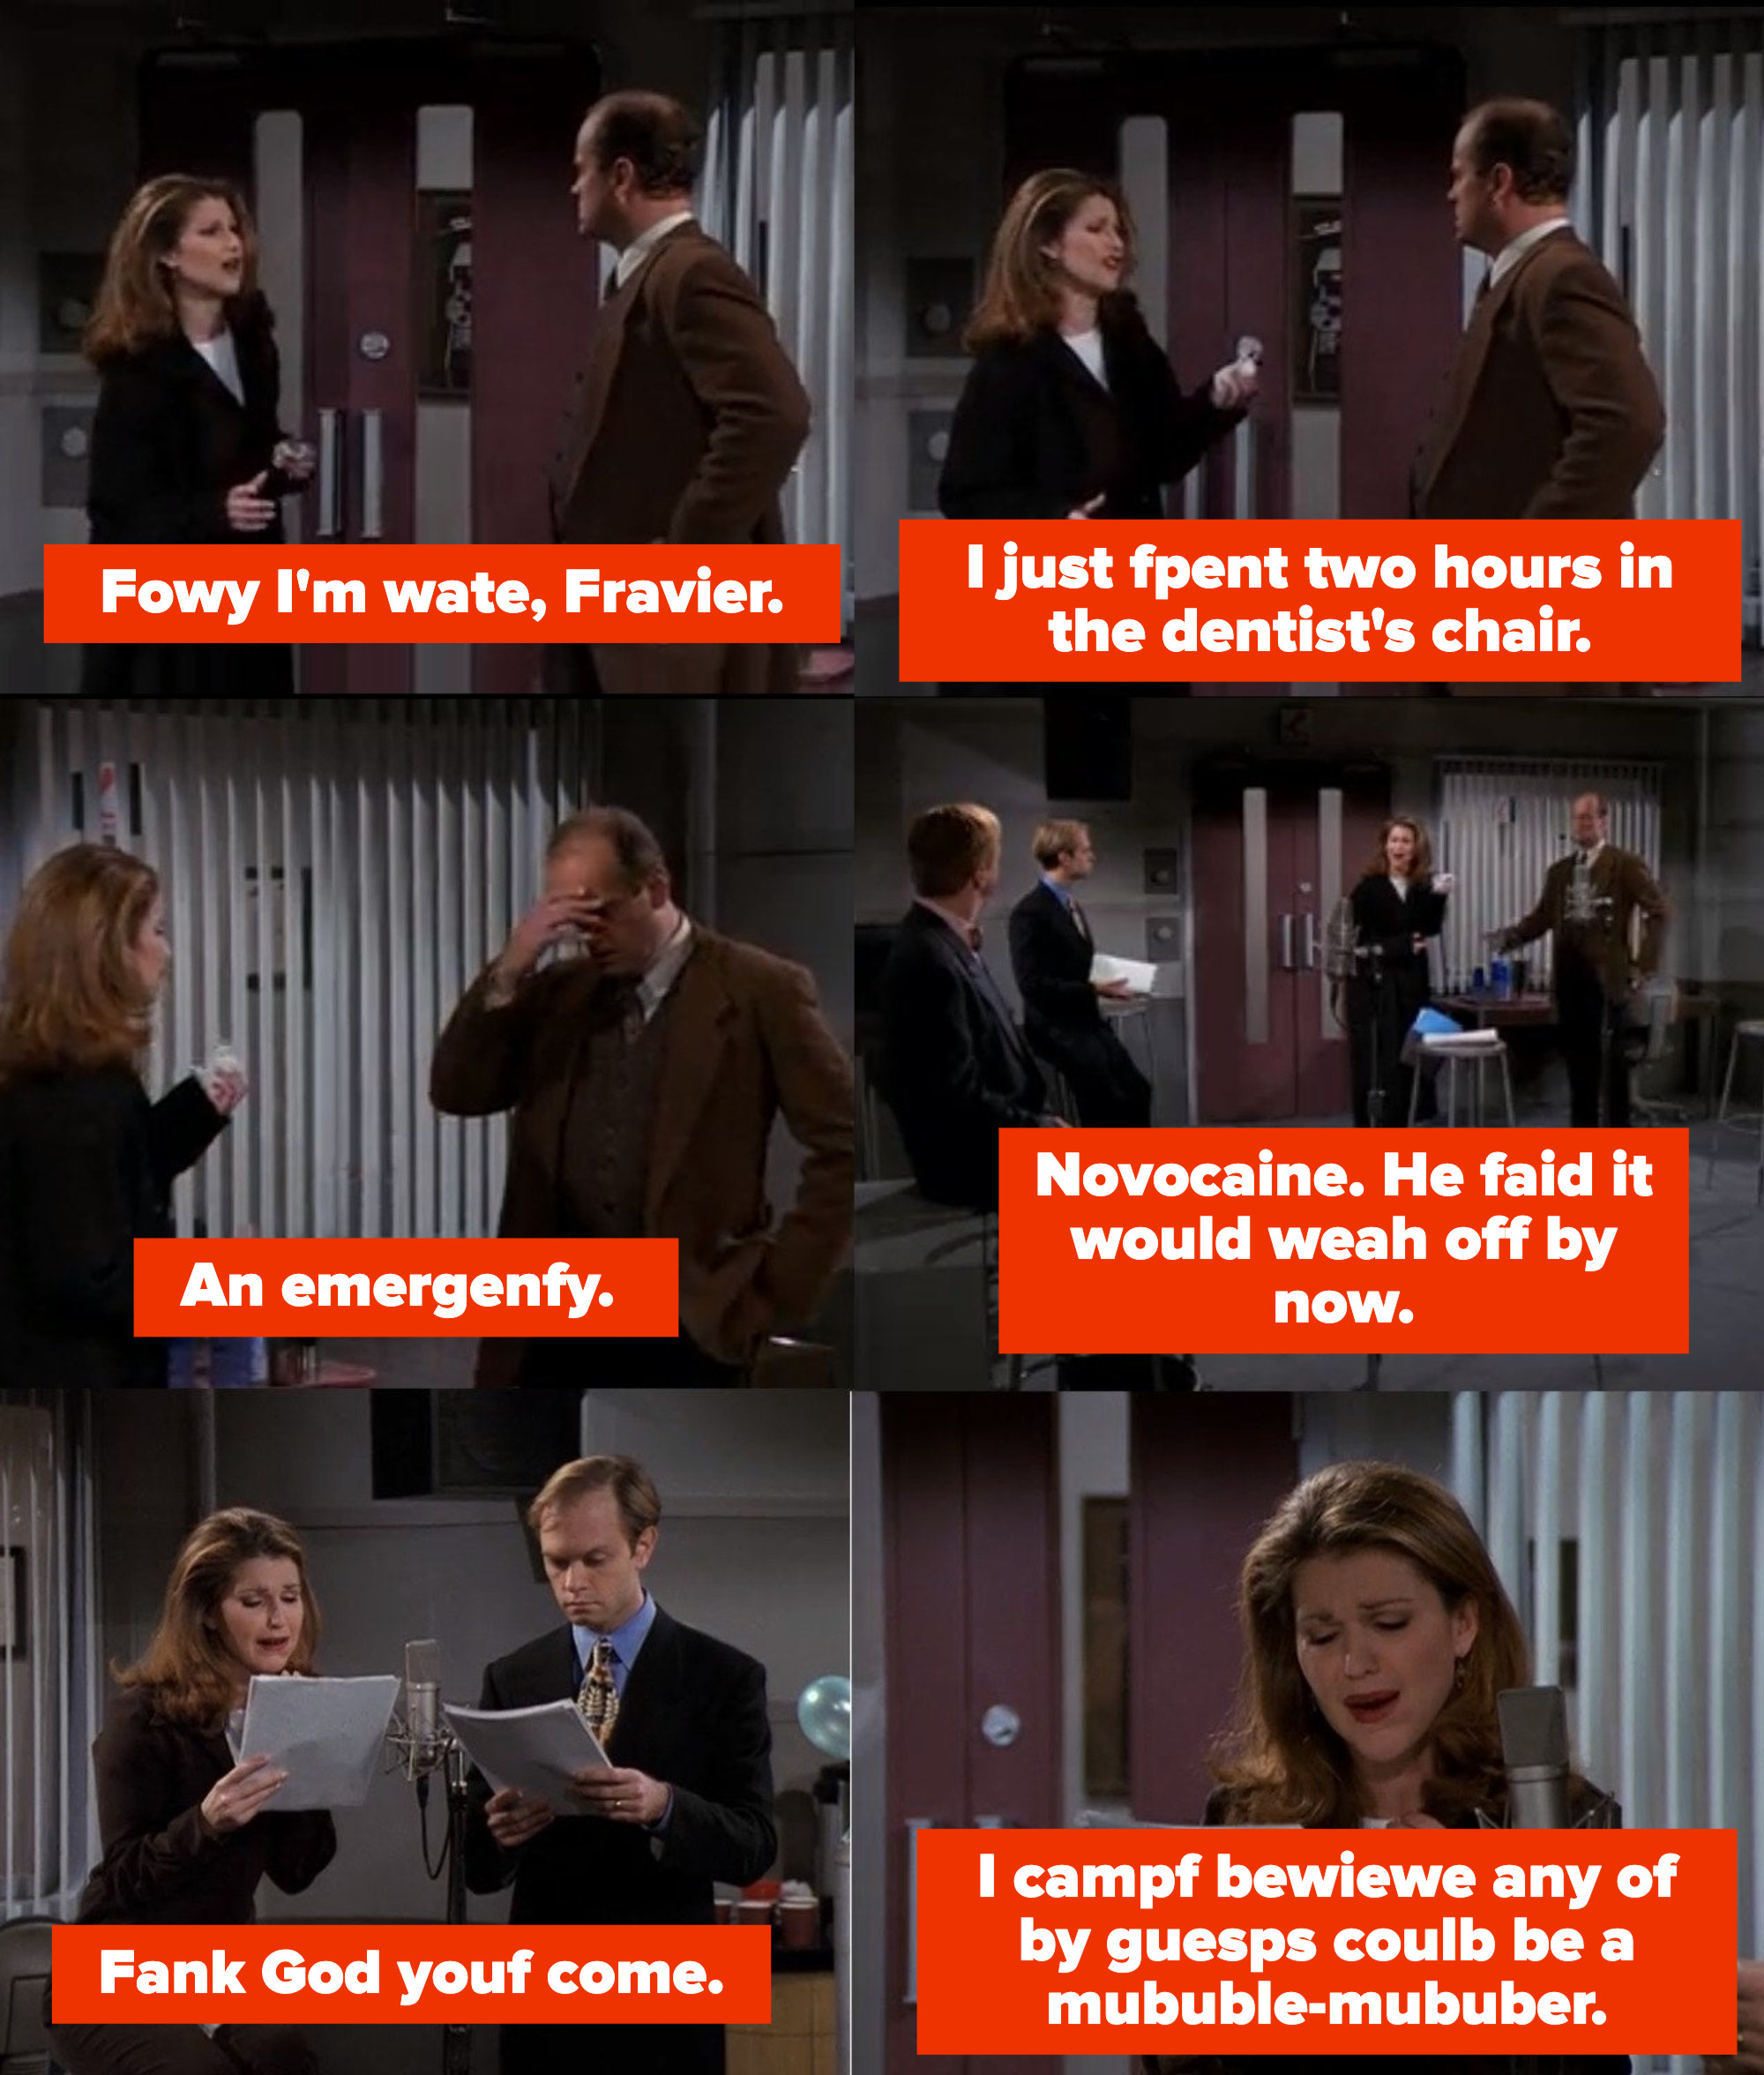 Frasier and Roz do a radio show, but Roz has just been to the dentist and can&#x27;t pronounce words well